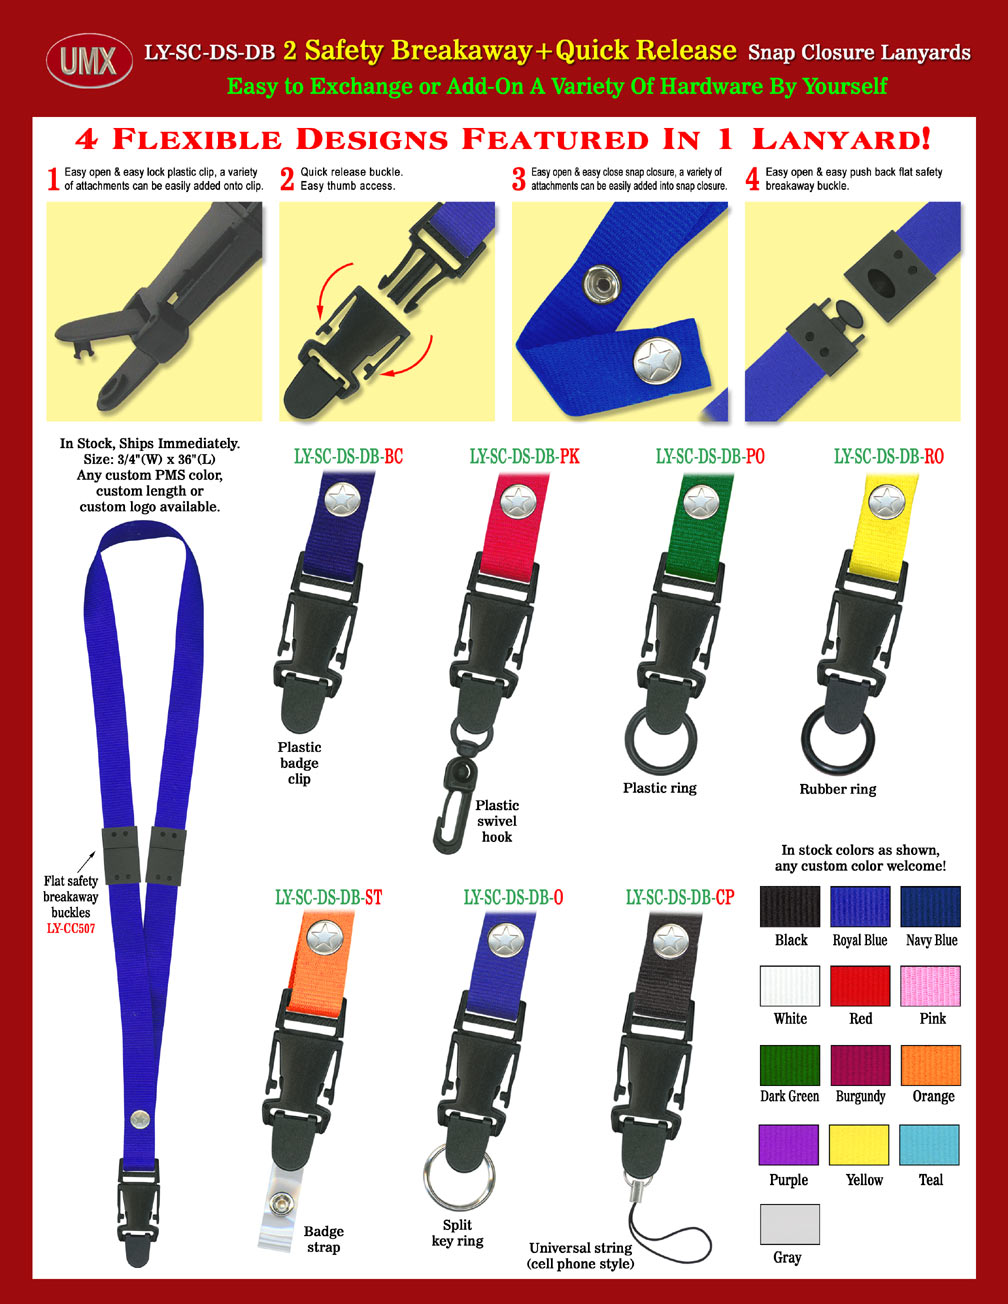 Quick Release Snap Closure Safety Lanyards Come With Simple, Flexible, Detachable and Double Safety Protection!